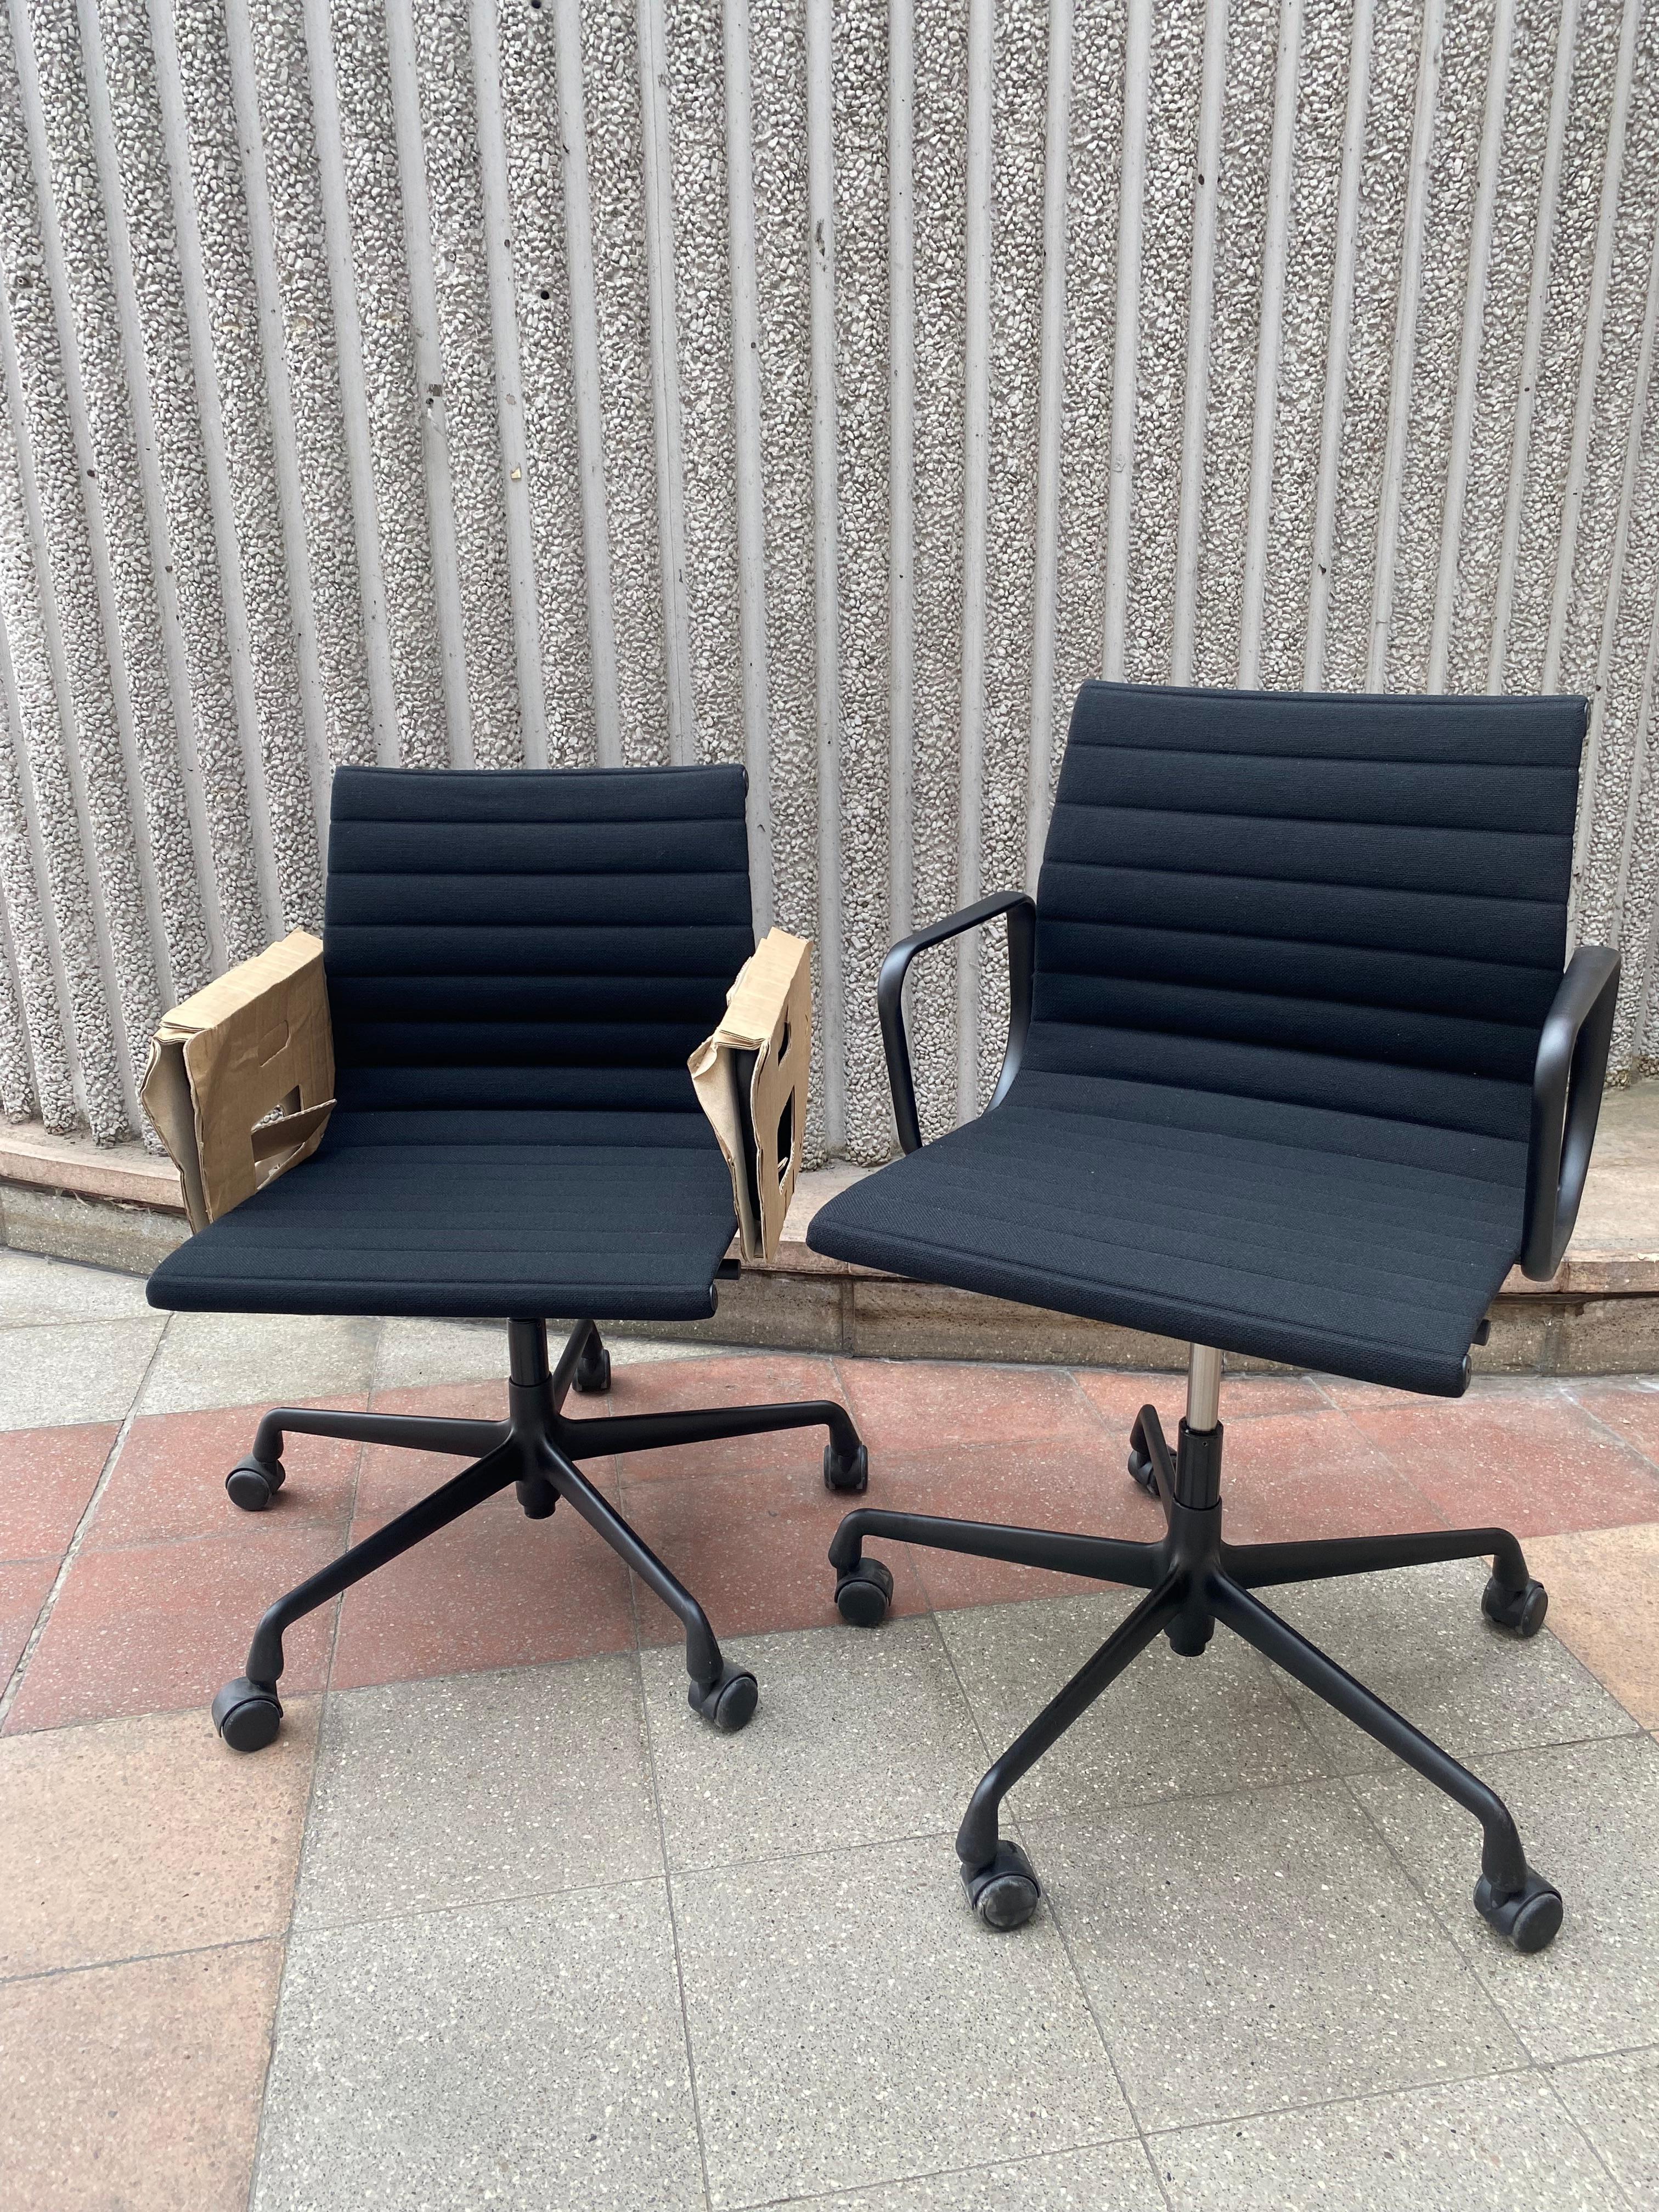 Pair of Charles Eames EA118 armchairs
Flesh aluminum
New
Vitra Edition Signed with their original label
Black aluminum and fabric
Wheeled and adjustable version
L 55 x d 75 x h 83